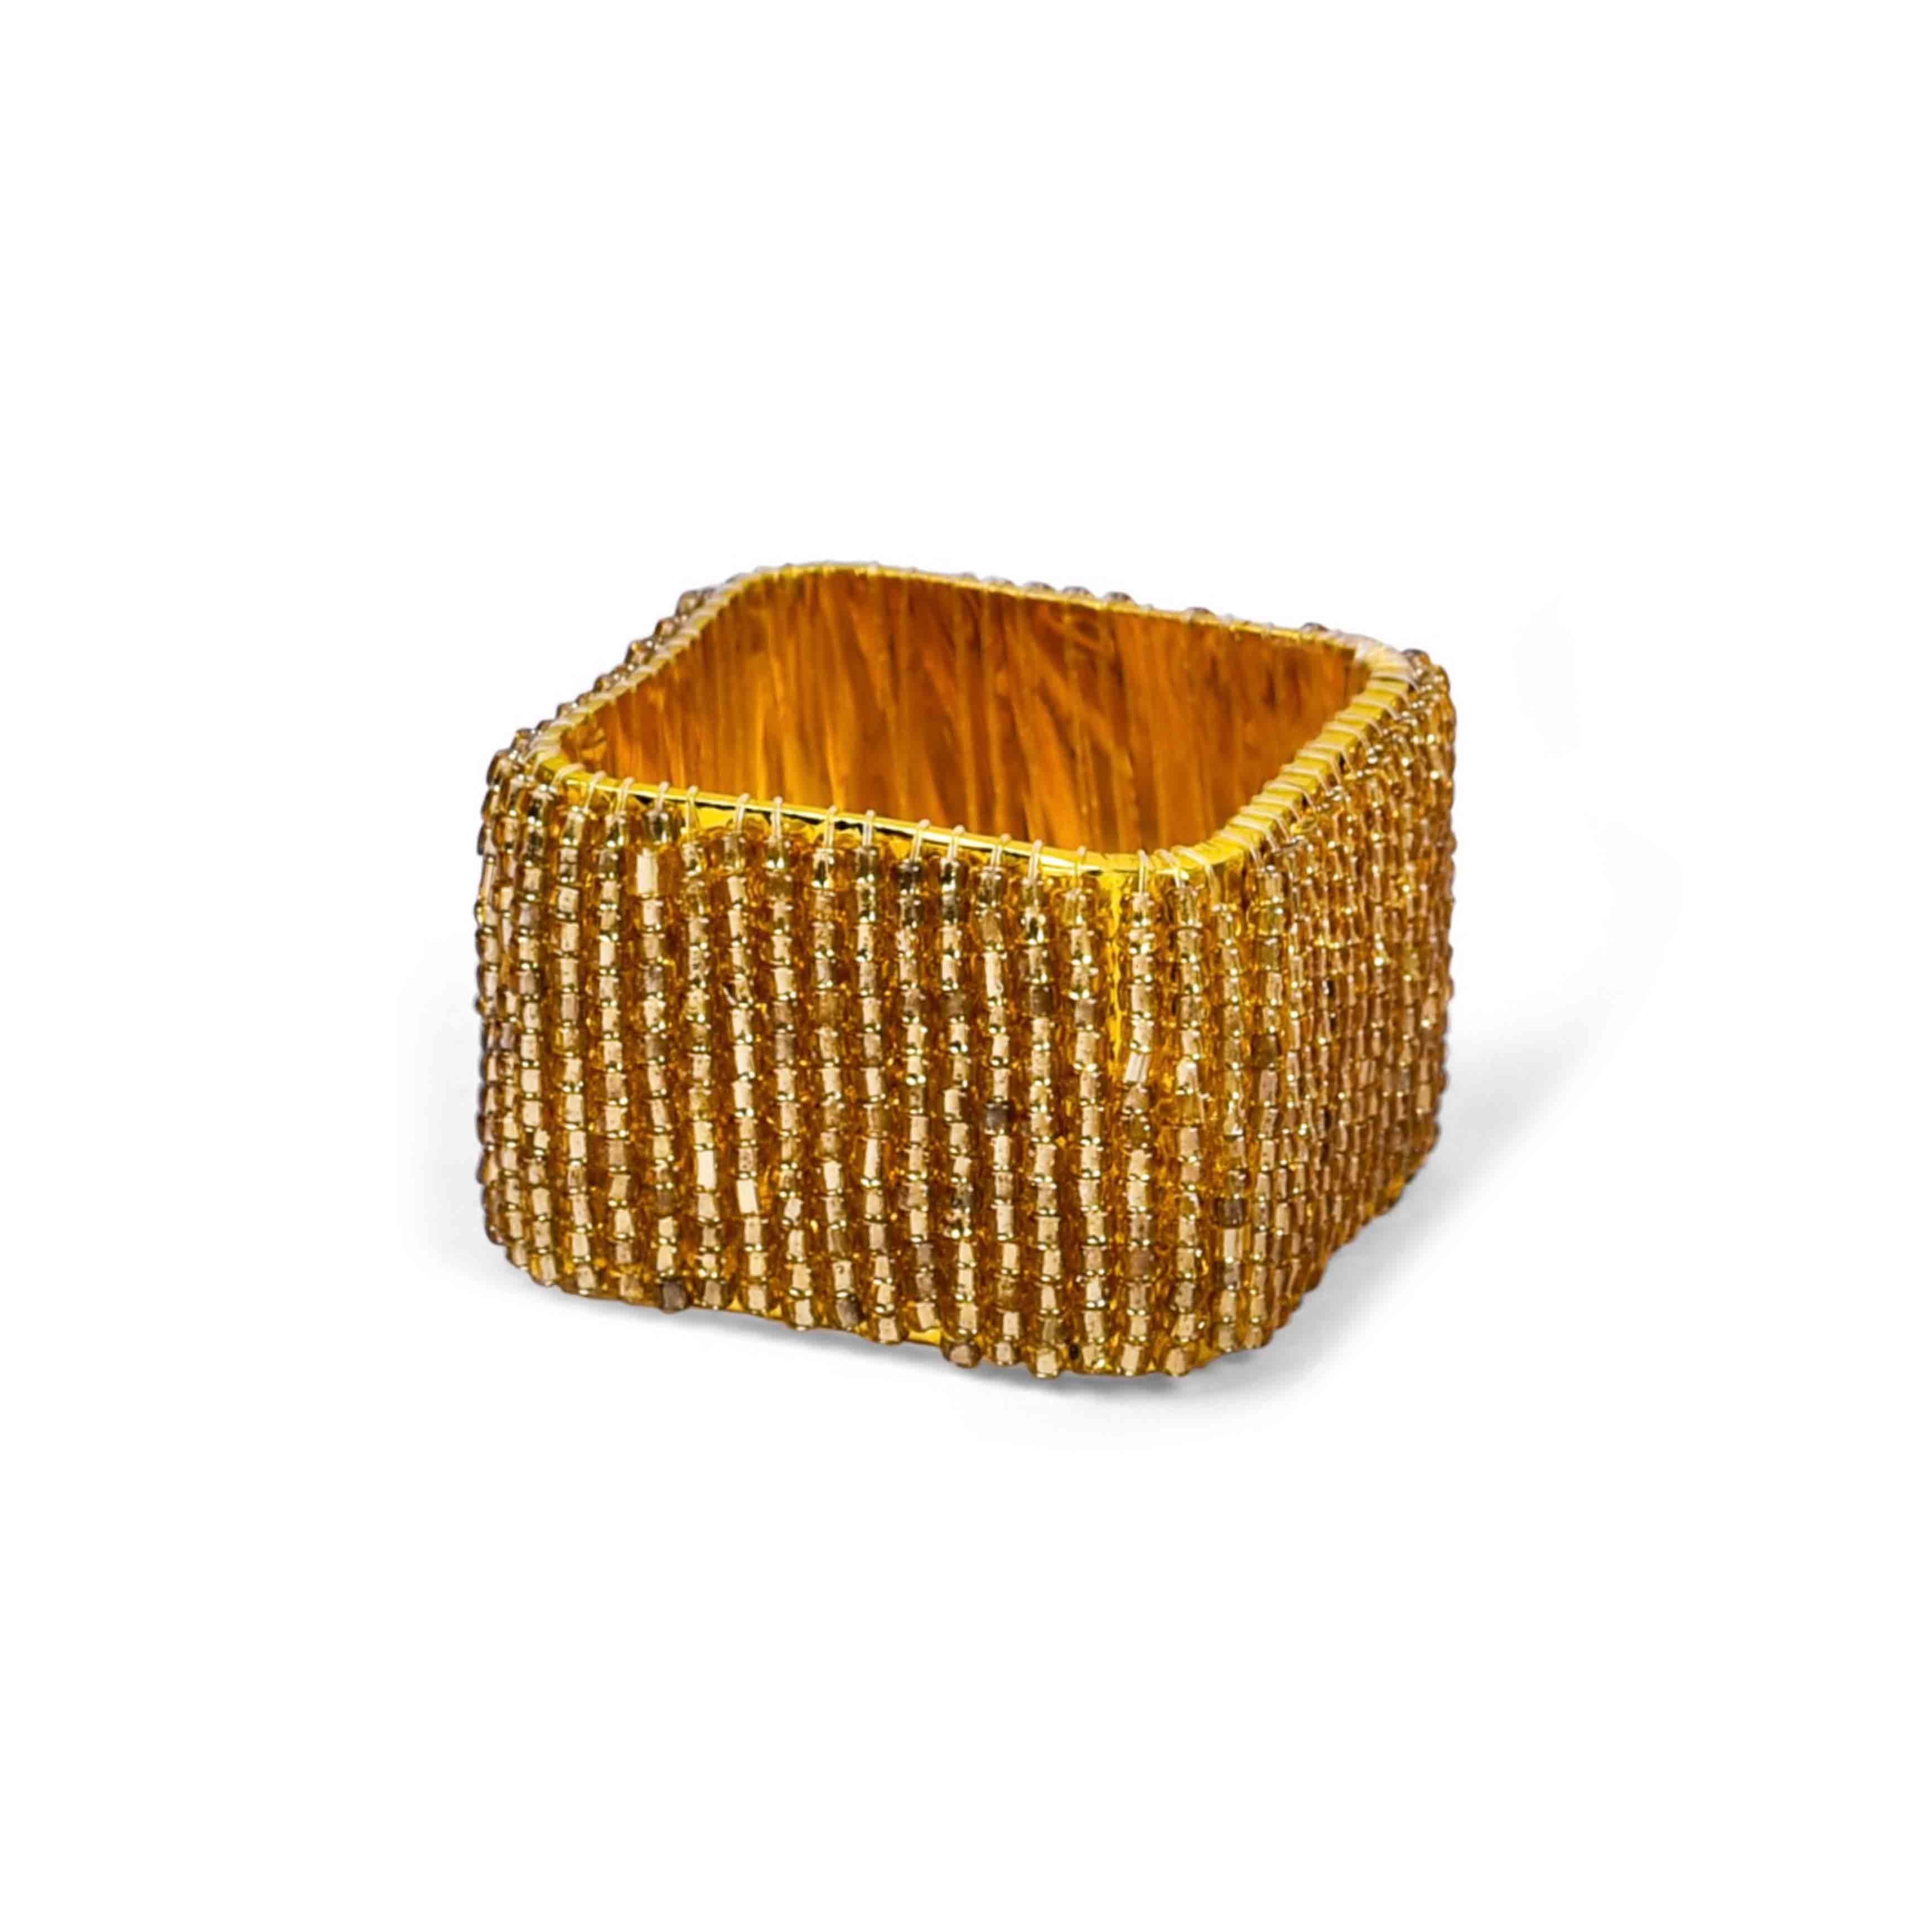 Classic Square Napkin Ring in Gold, Set of 4